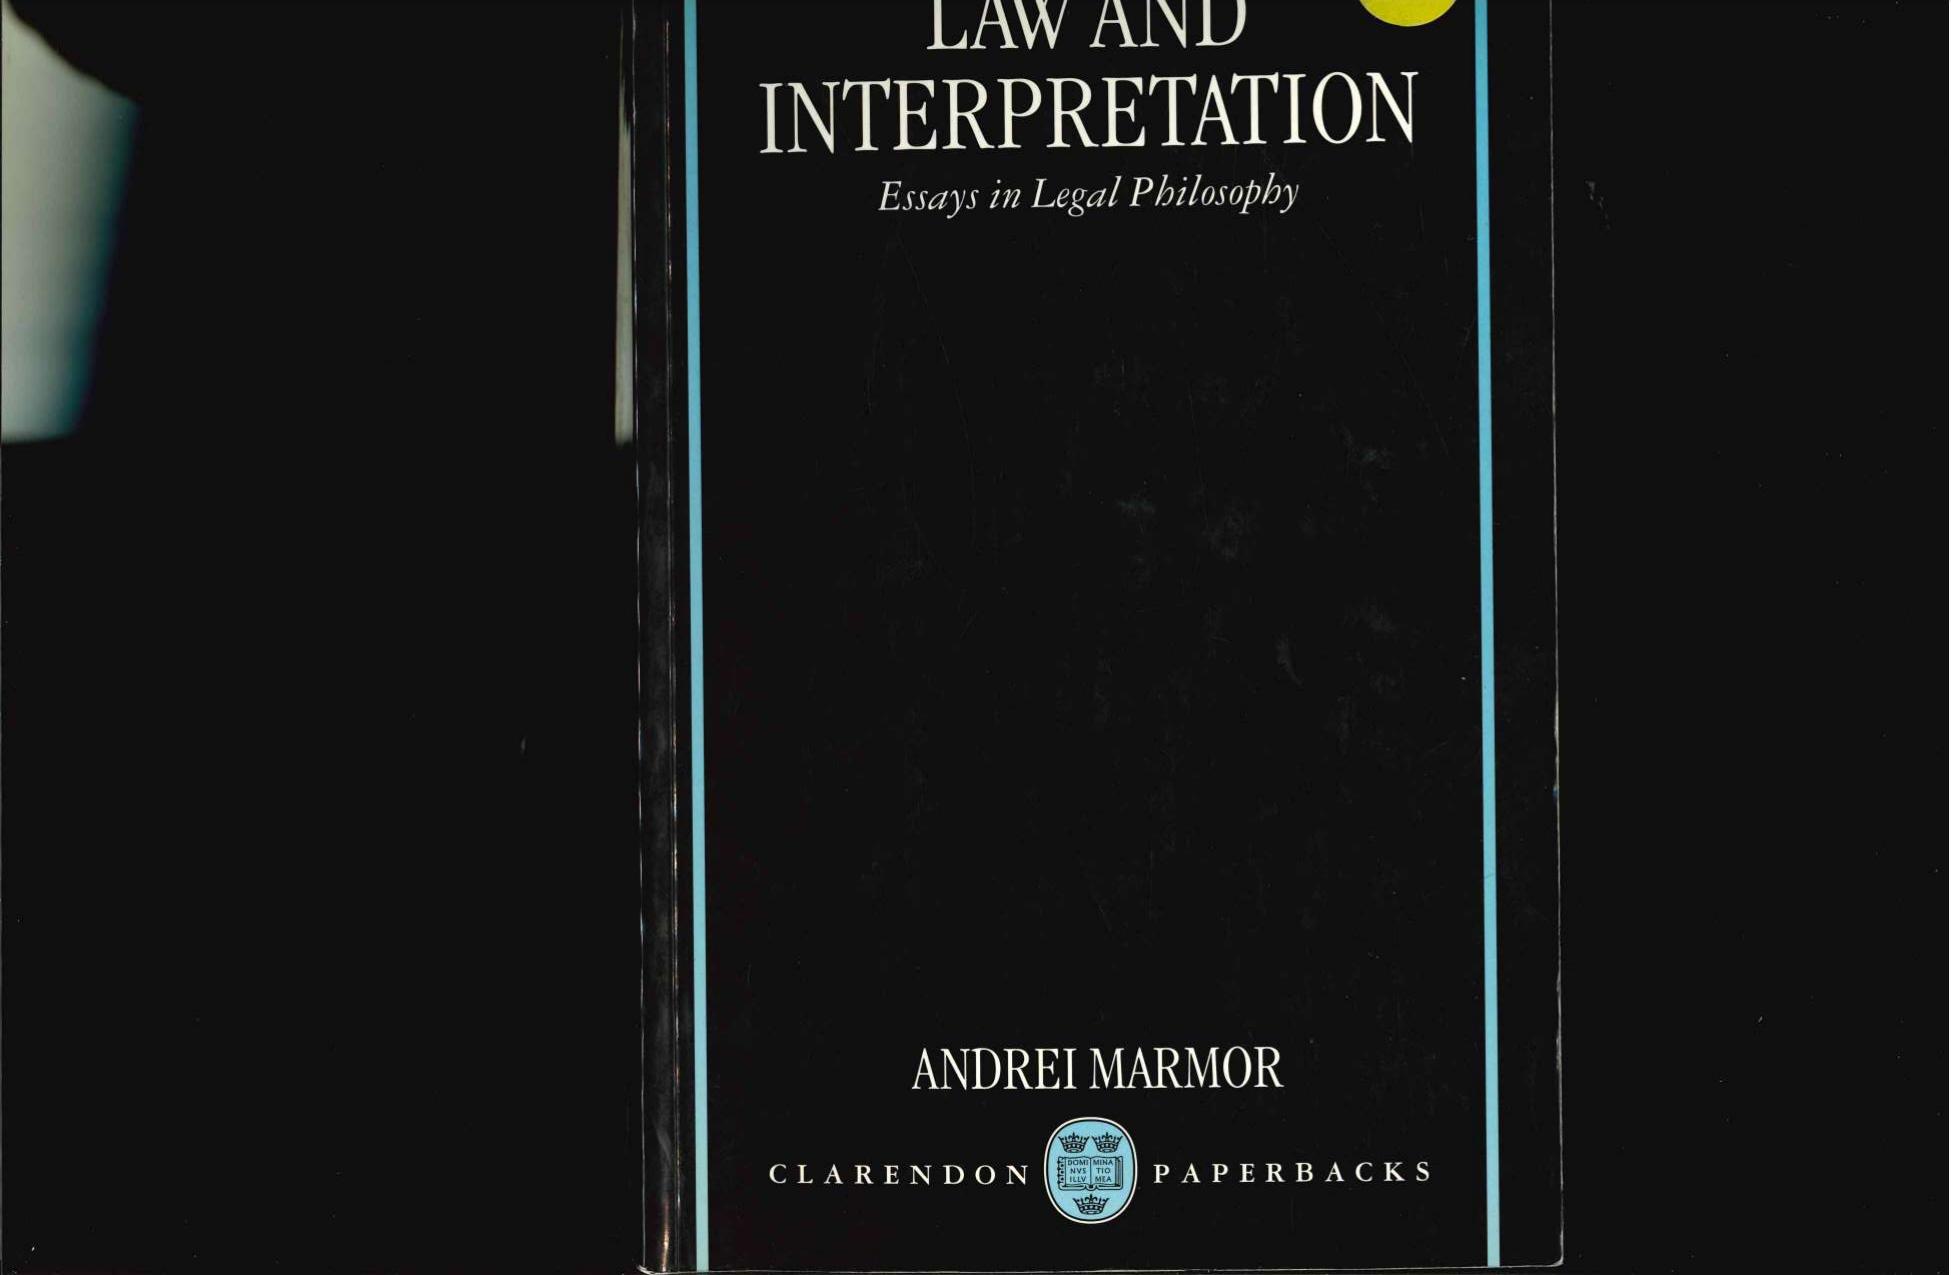 Law and Interpretation: Essays in Legal Philosophy by Andrei Marmor